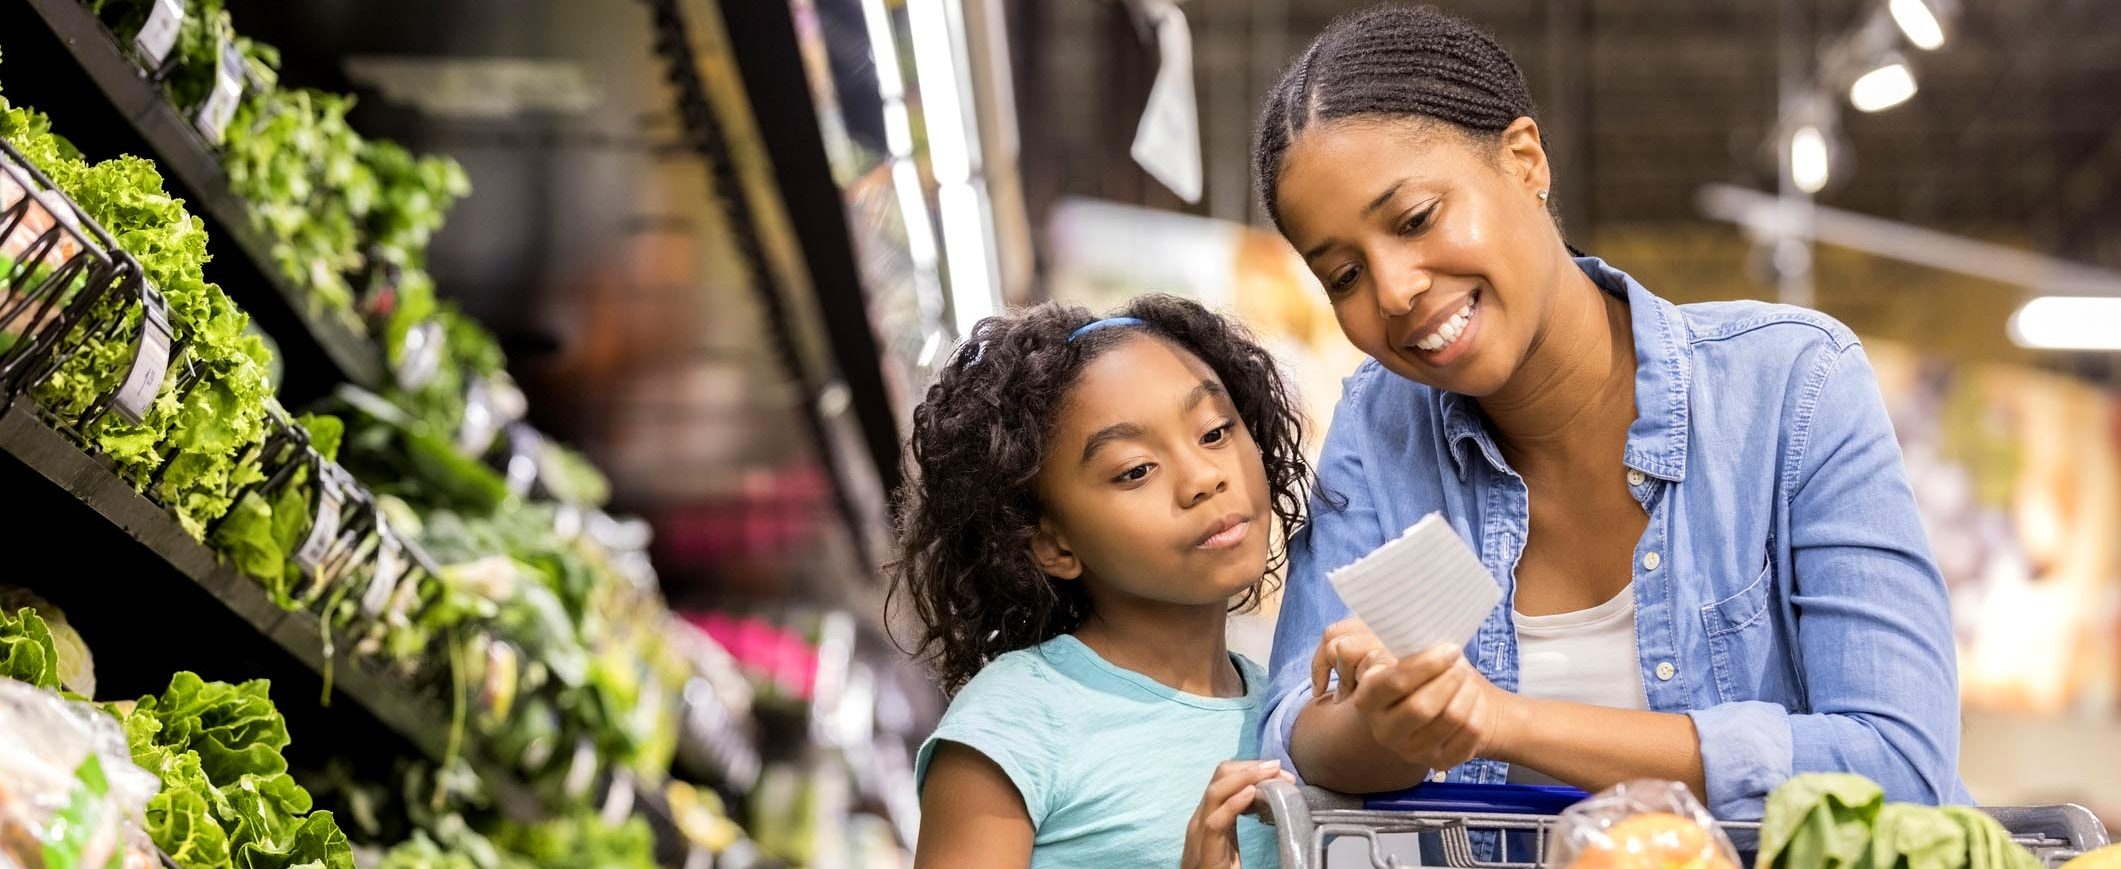 A woman and her daughter look over a shopping list in a grocery store.